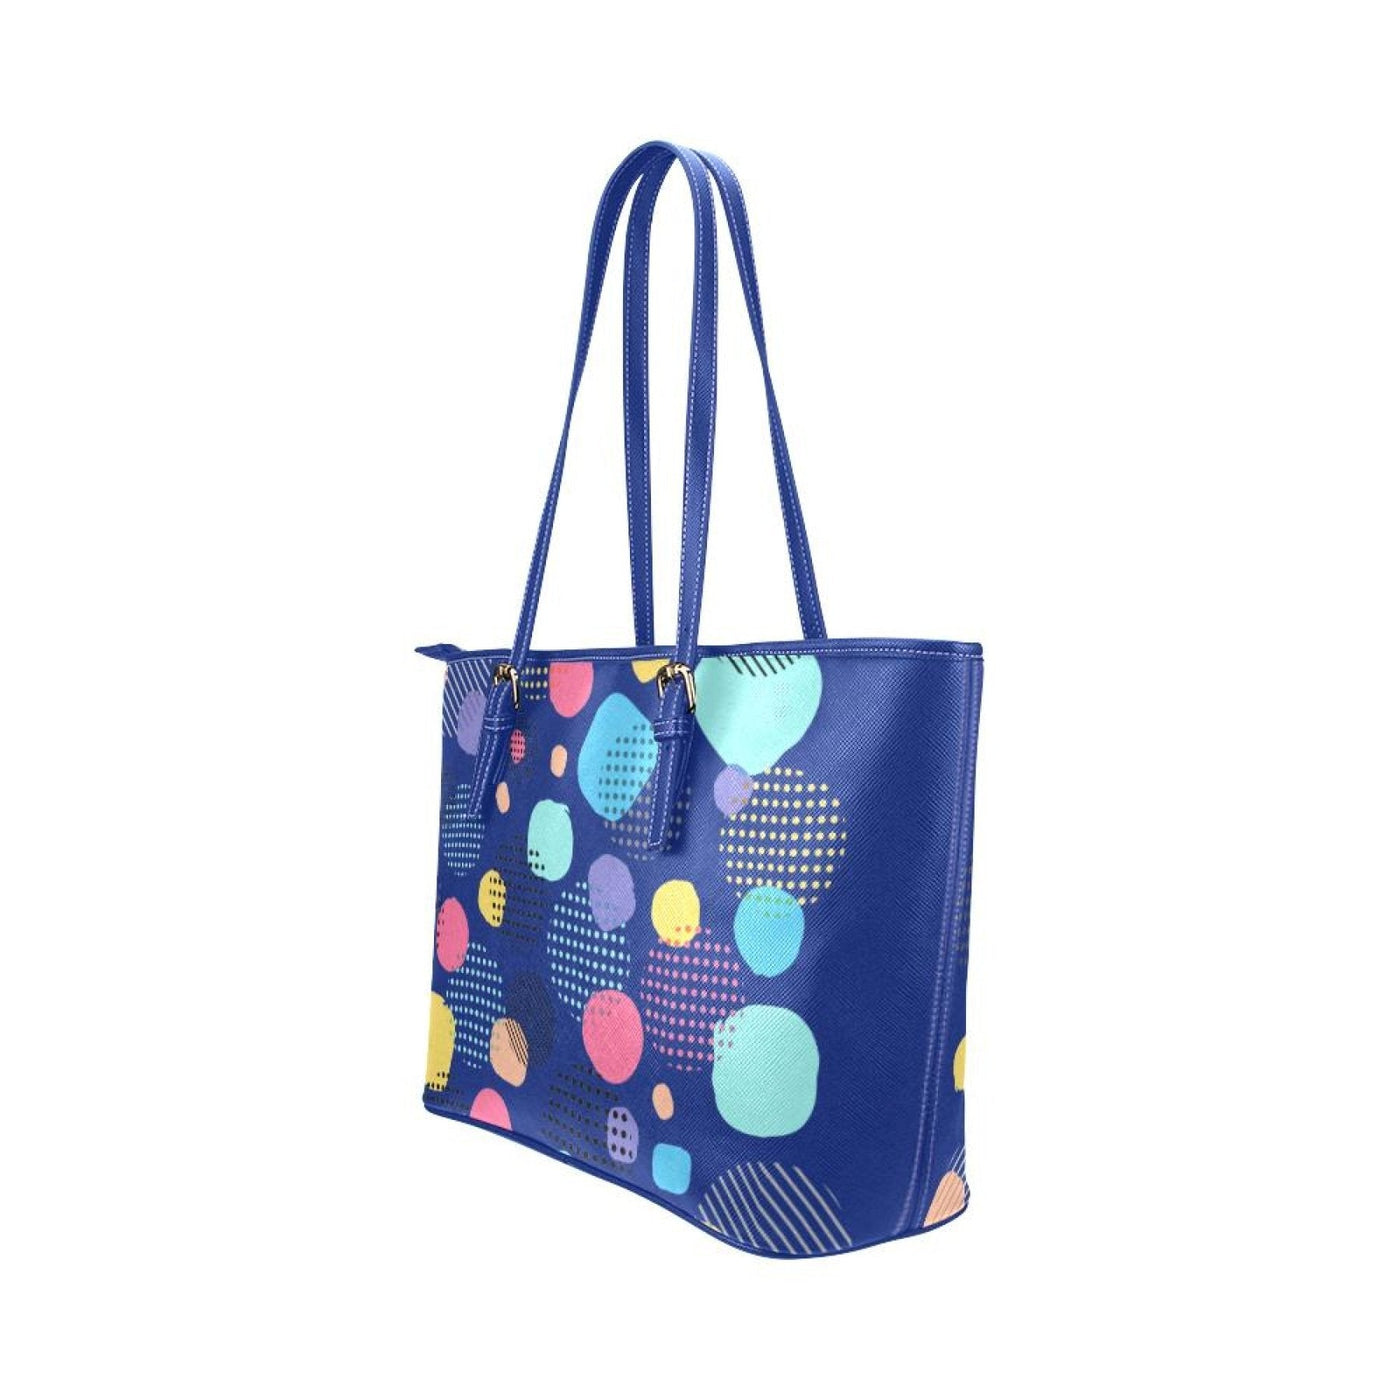 Large Leather Tote Shoulder Bag - Spotty Blue Stylish - Bags | Leather Tote Bags